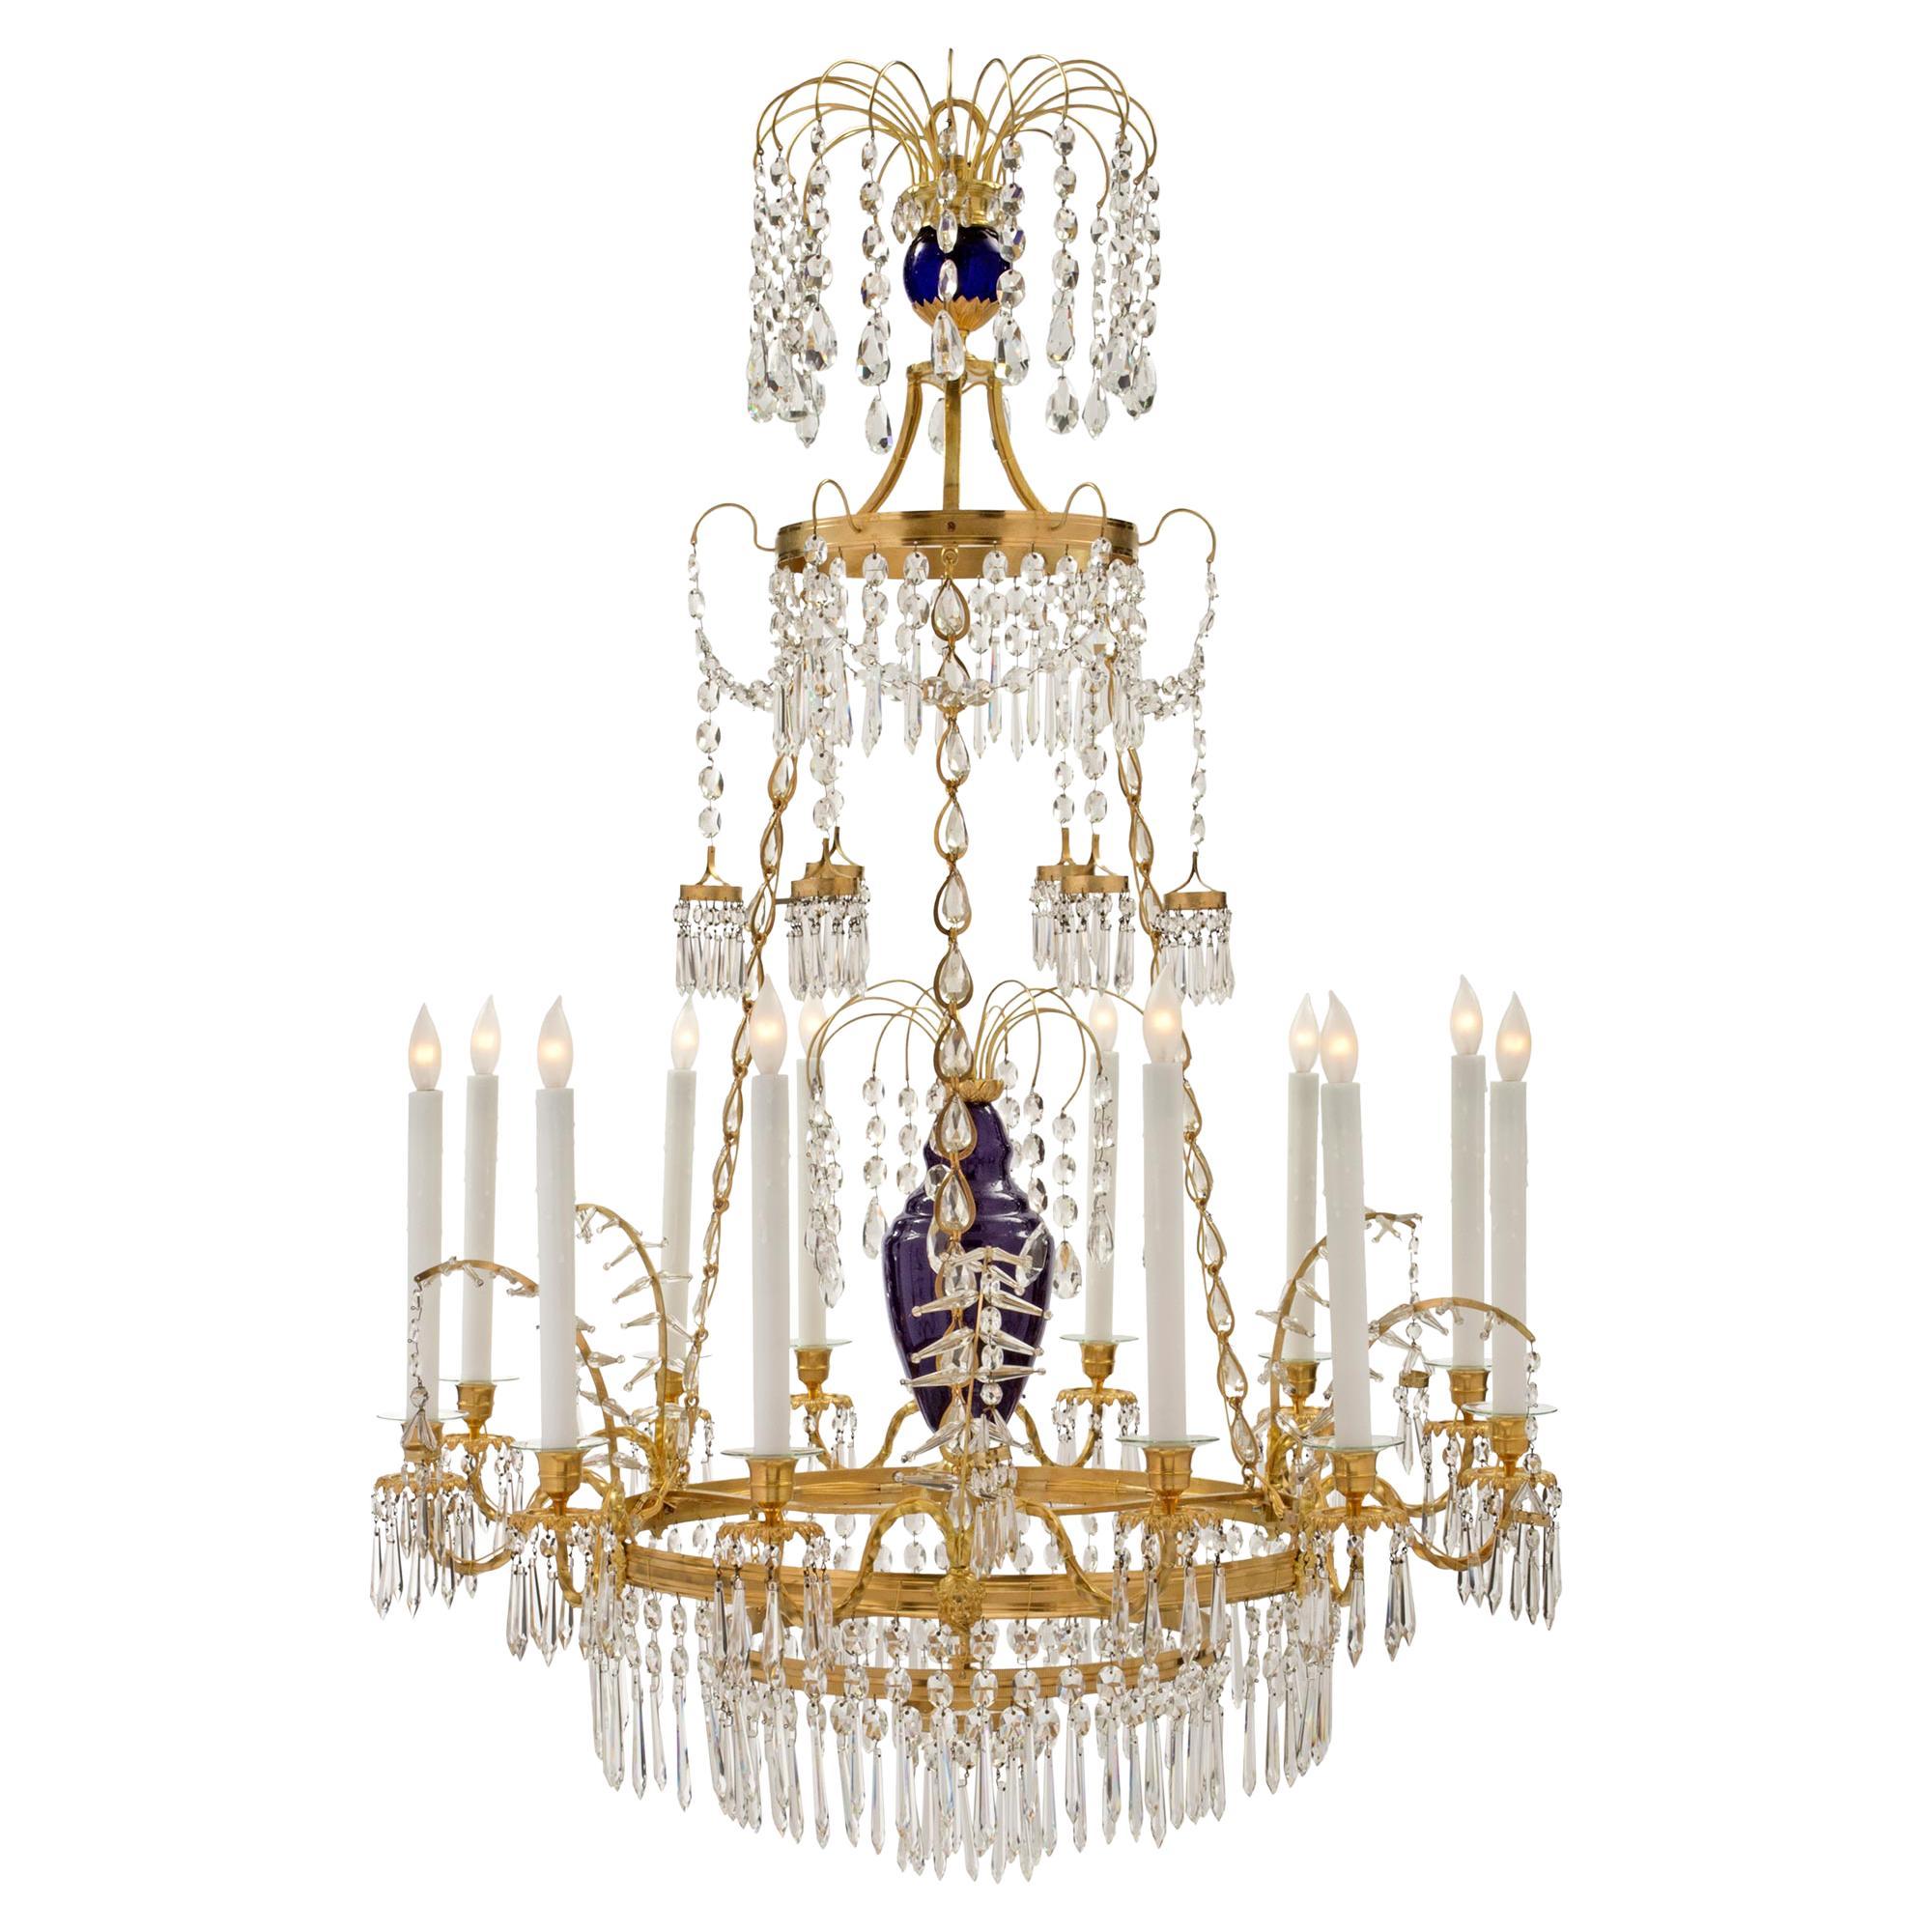 Russian 19th Century Neoclassical Style Glass, Crystal and Ormolu Chandelier For Sale